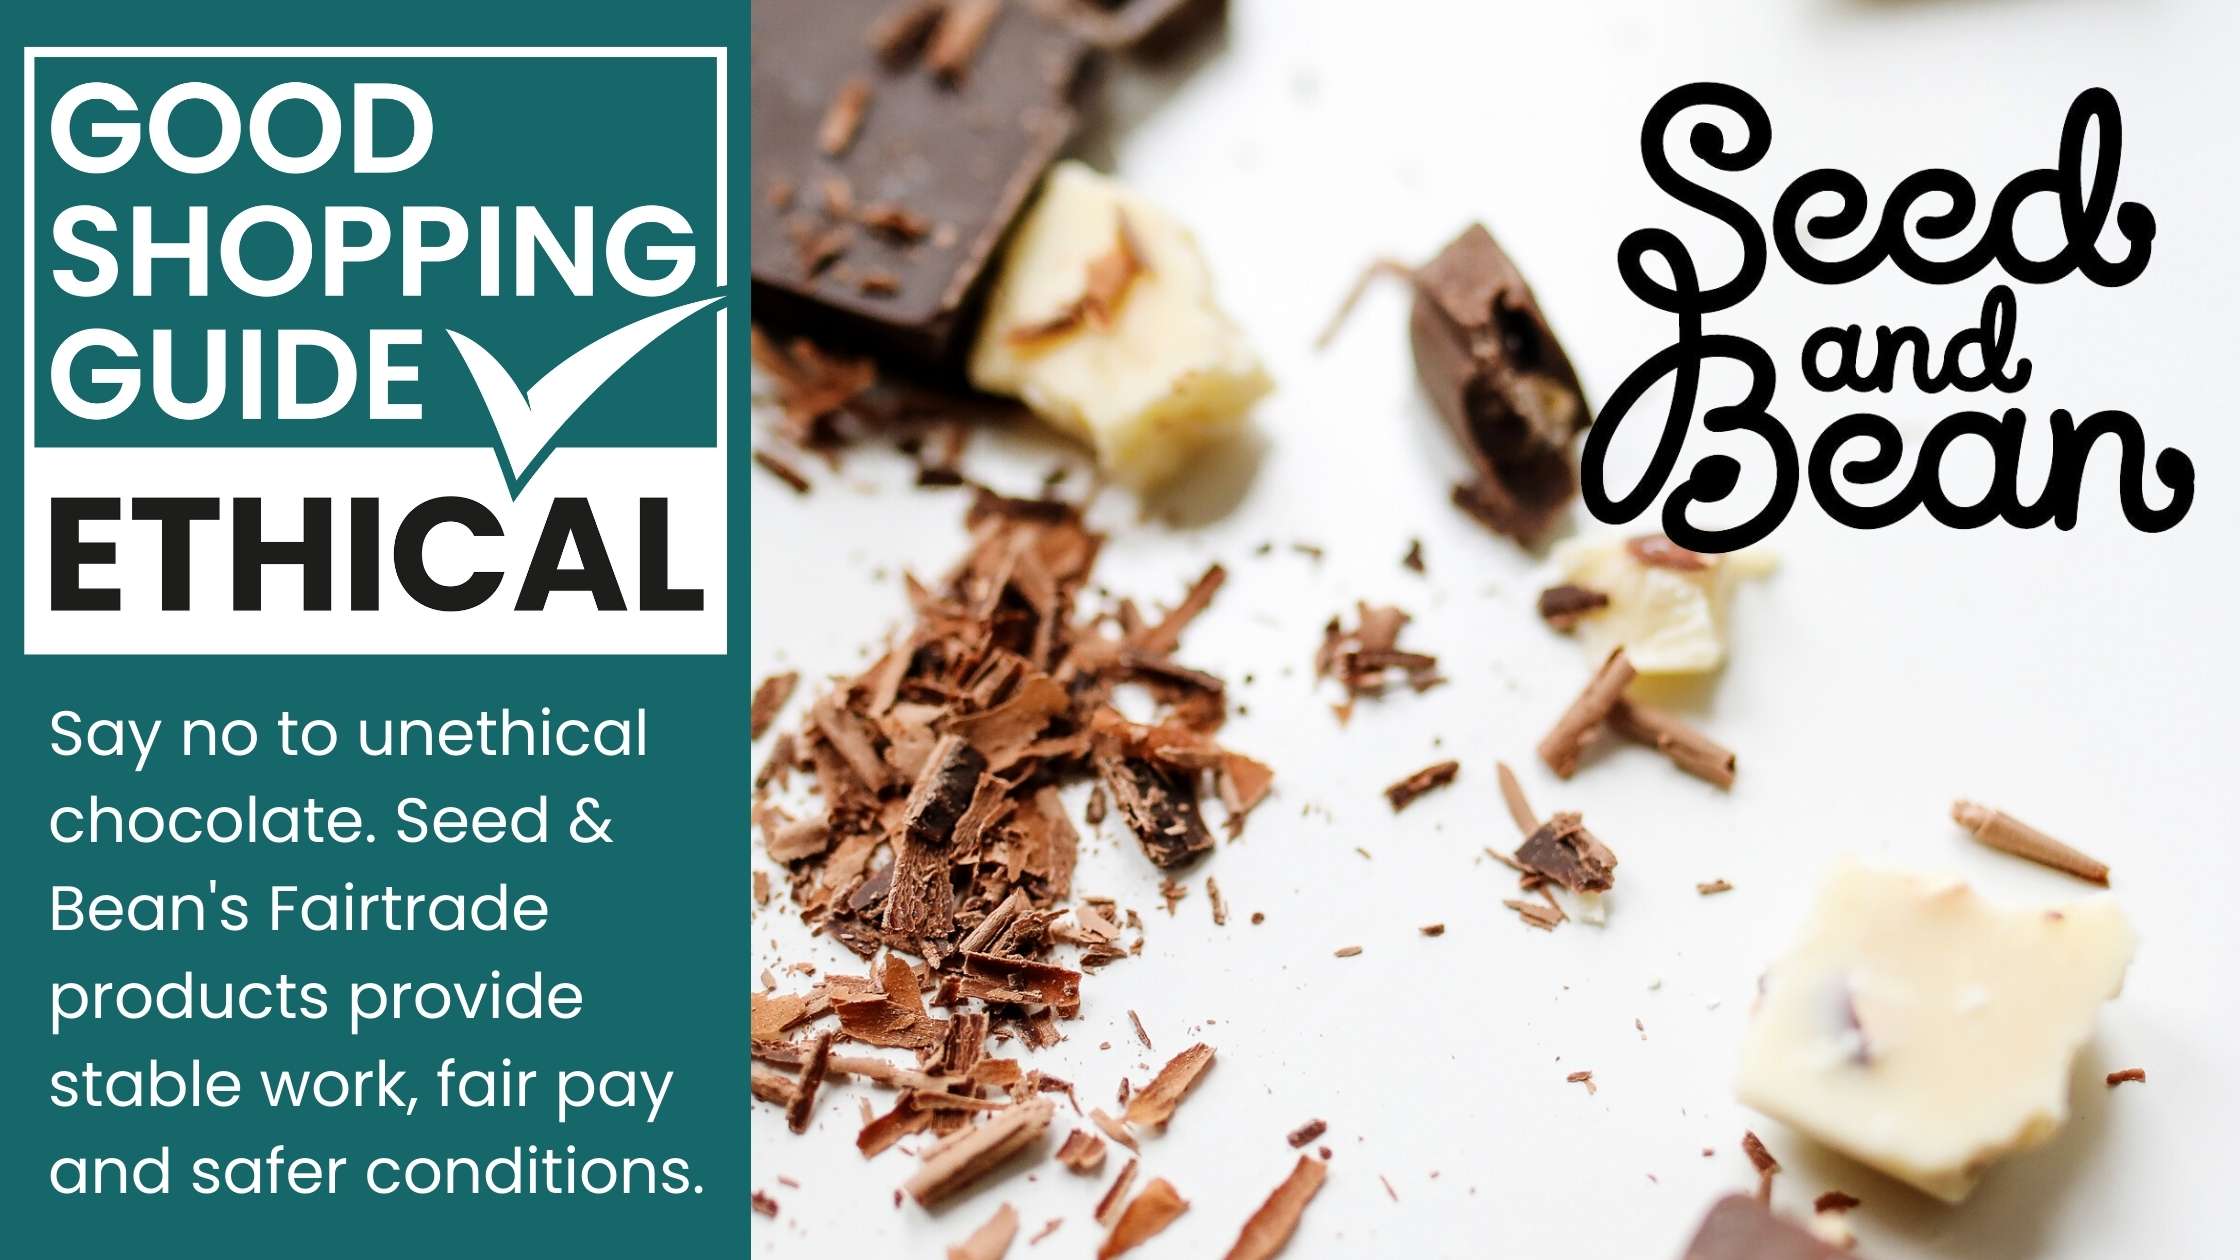 Seed and Bean Organic and ethical chocolate with The Good Shopping Guide